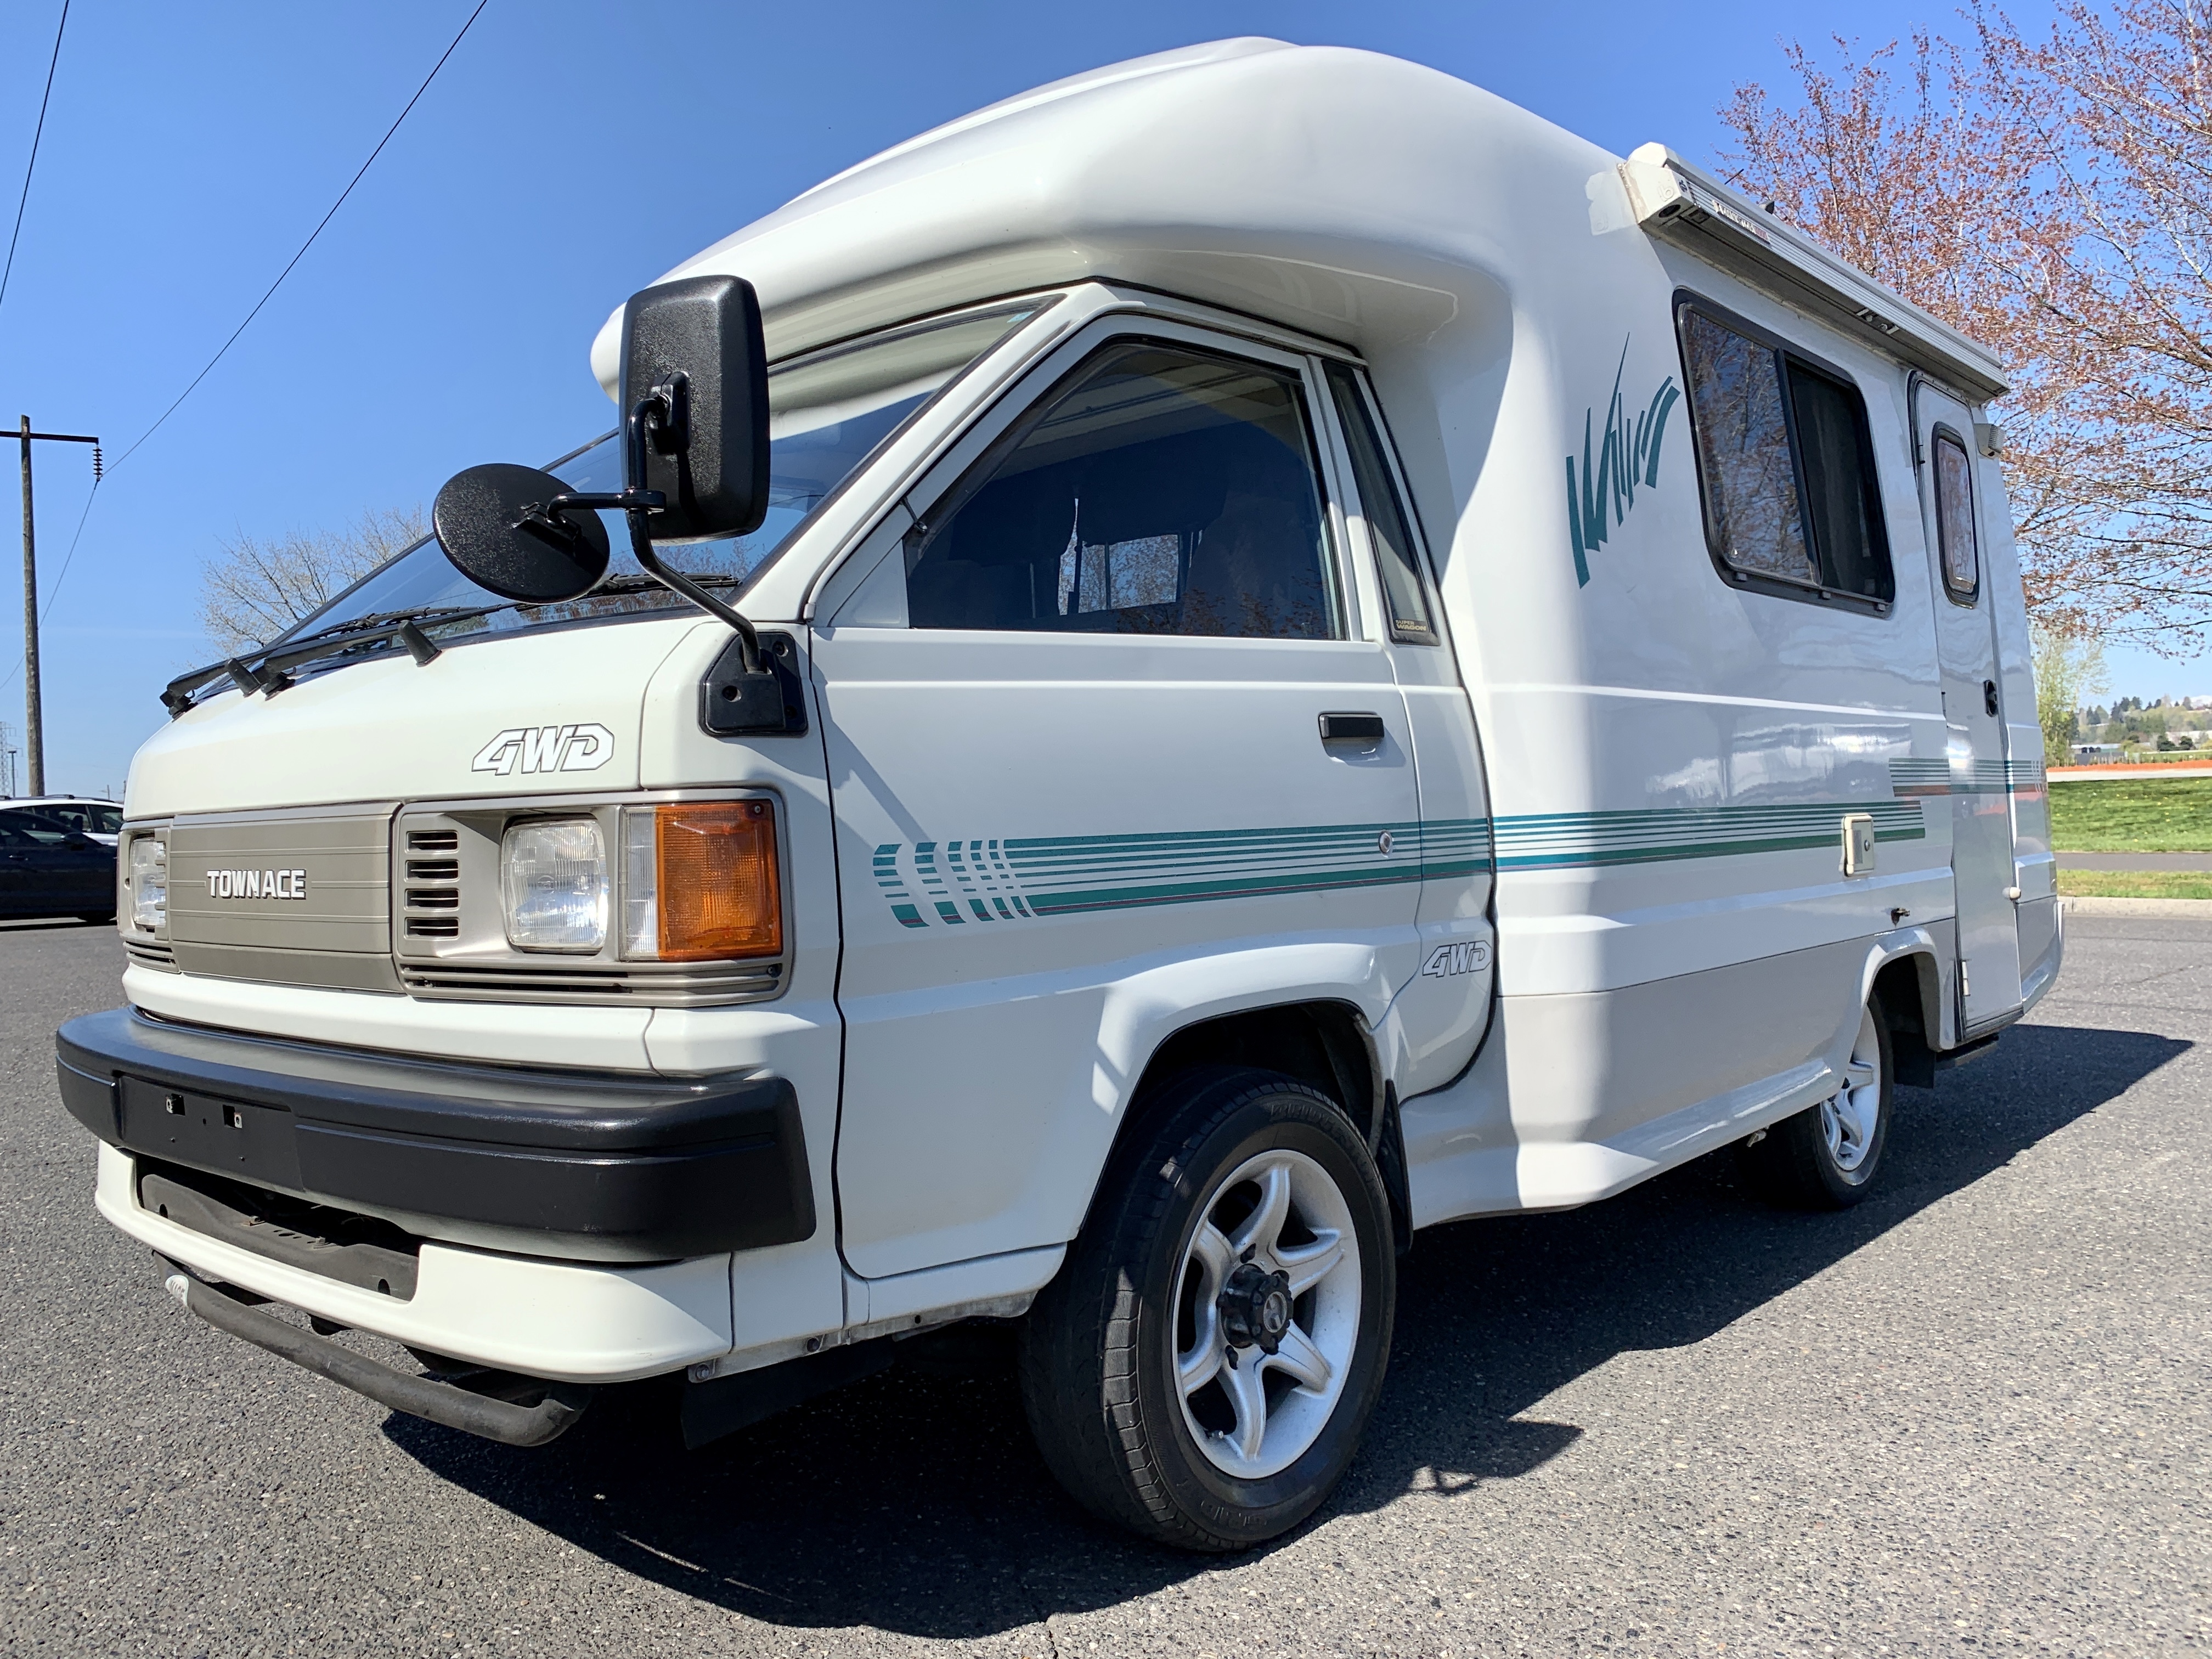 townace camper for sale